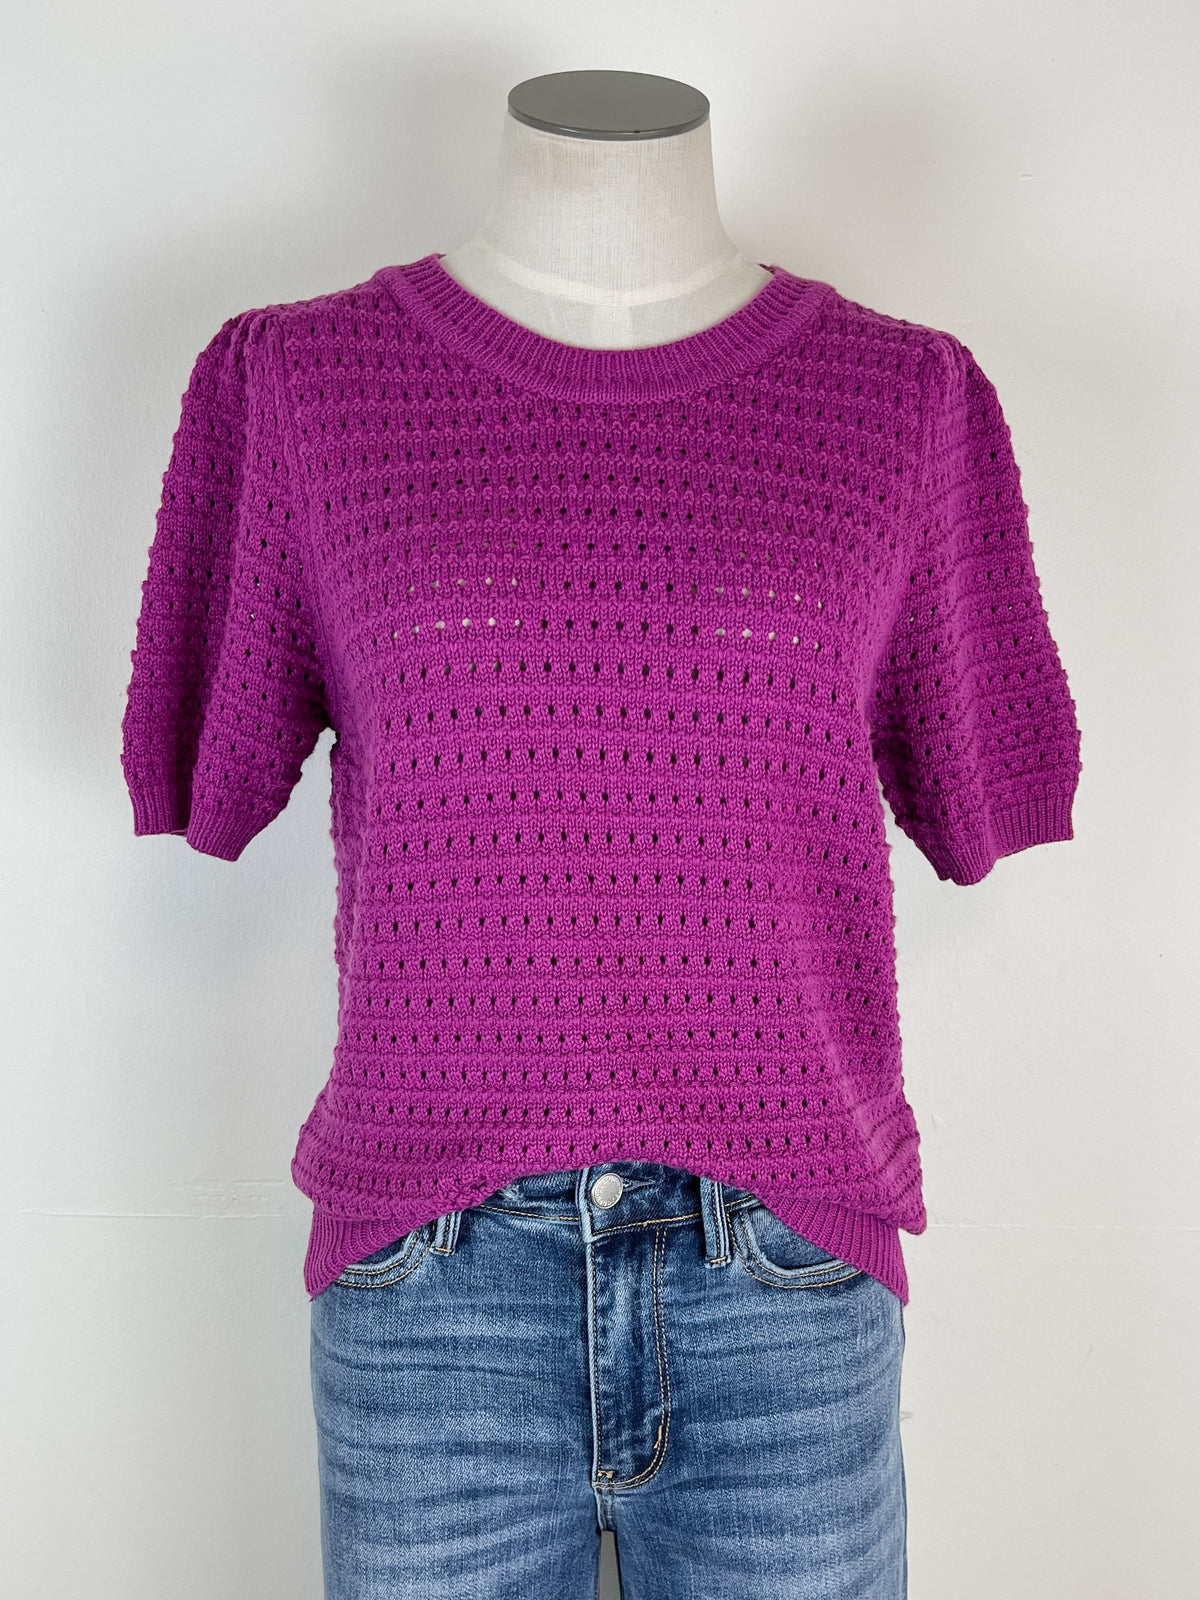 Ayla Pointelle Knit Top in Dark Orchid